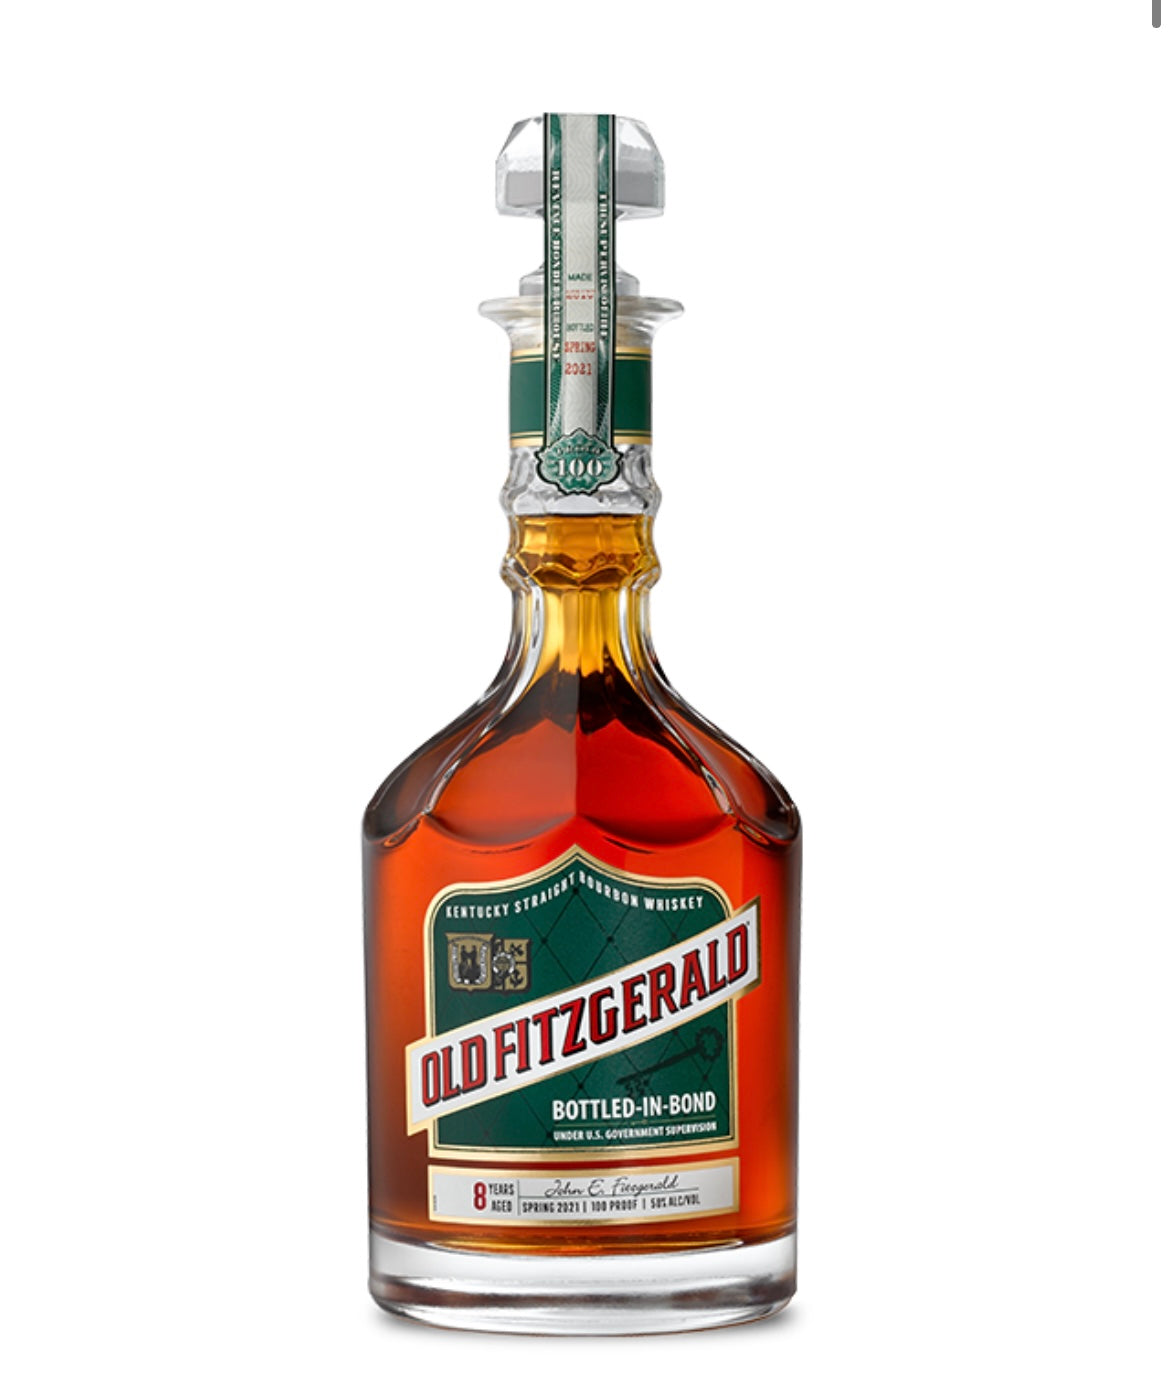 Buy Old Fitzgerald Aged 8 Years Bottled In Bond Bourbon Whiskey 750ml ...